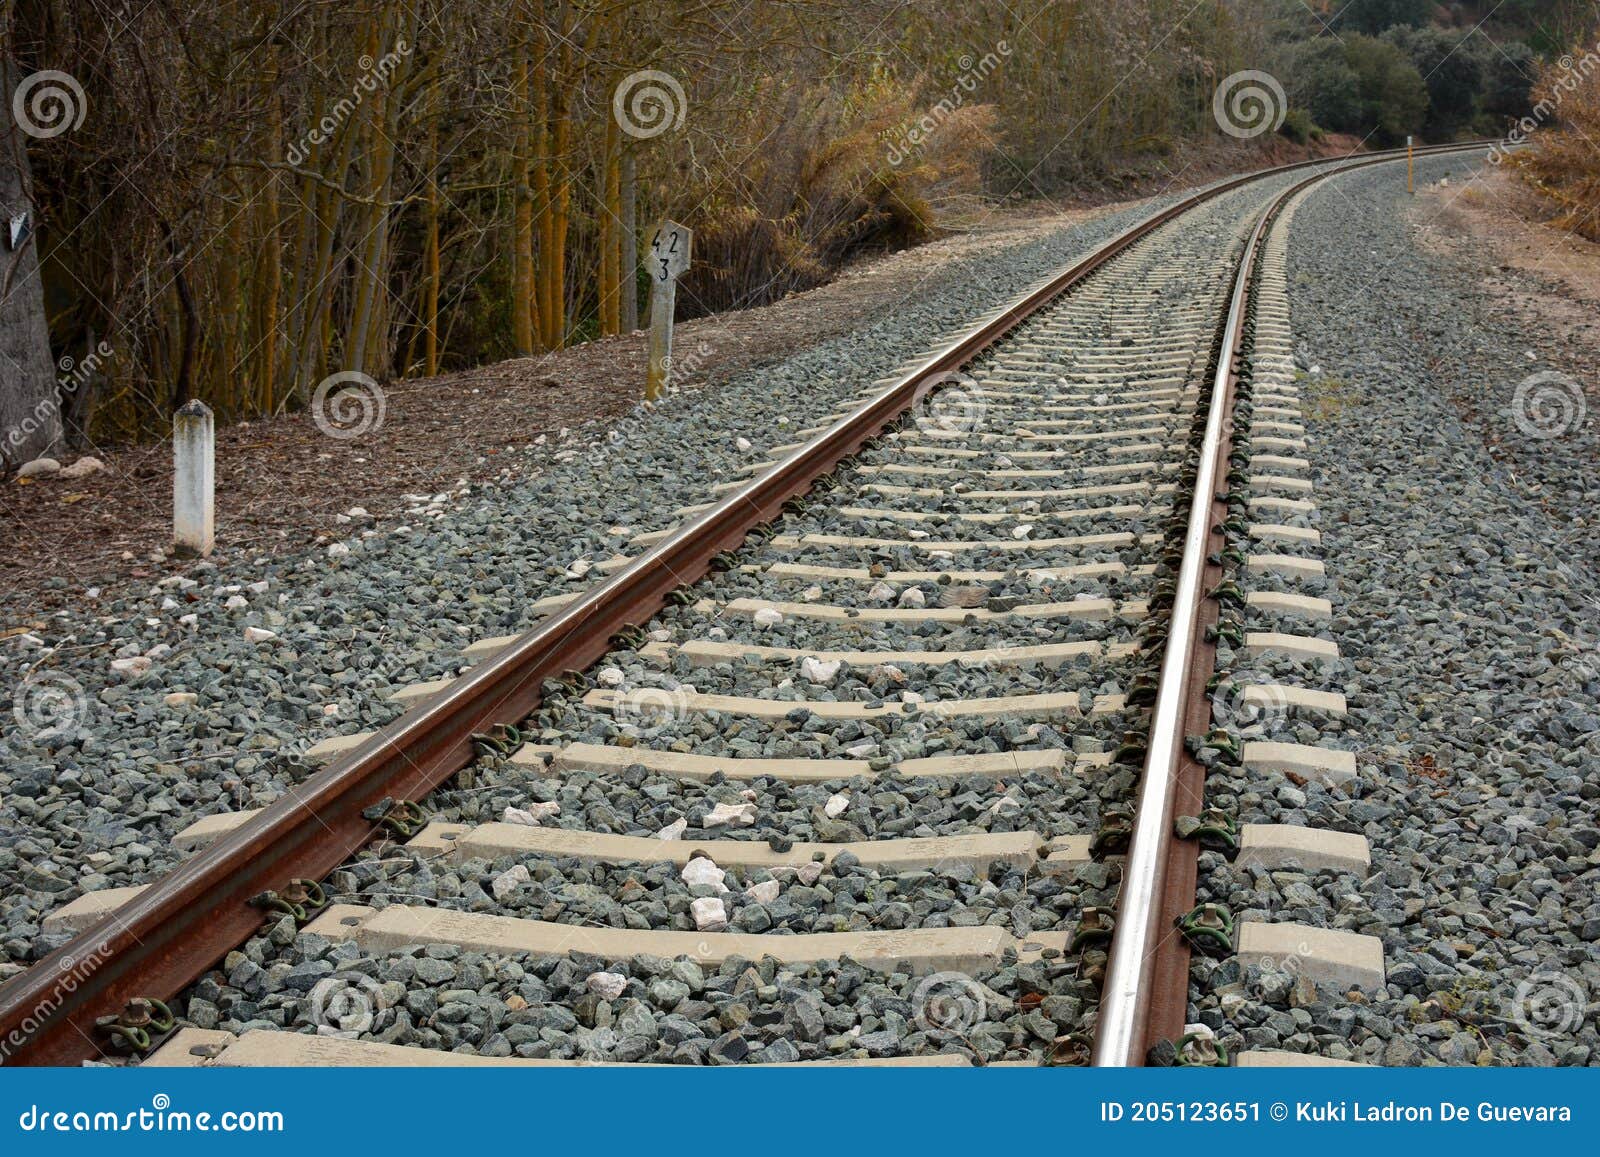 conventional railway track